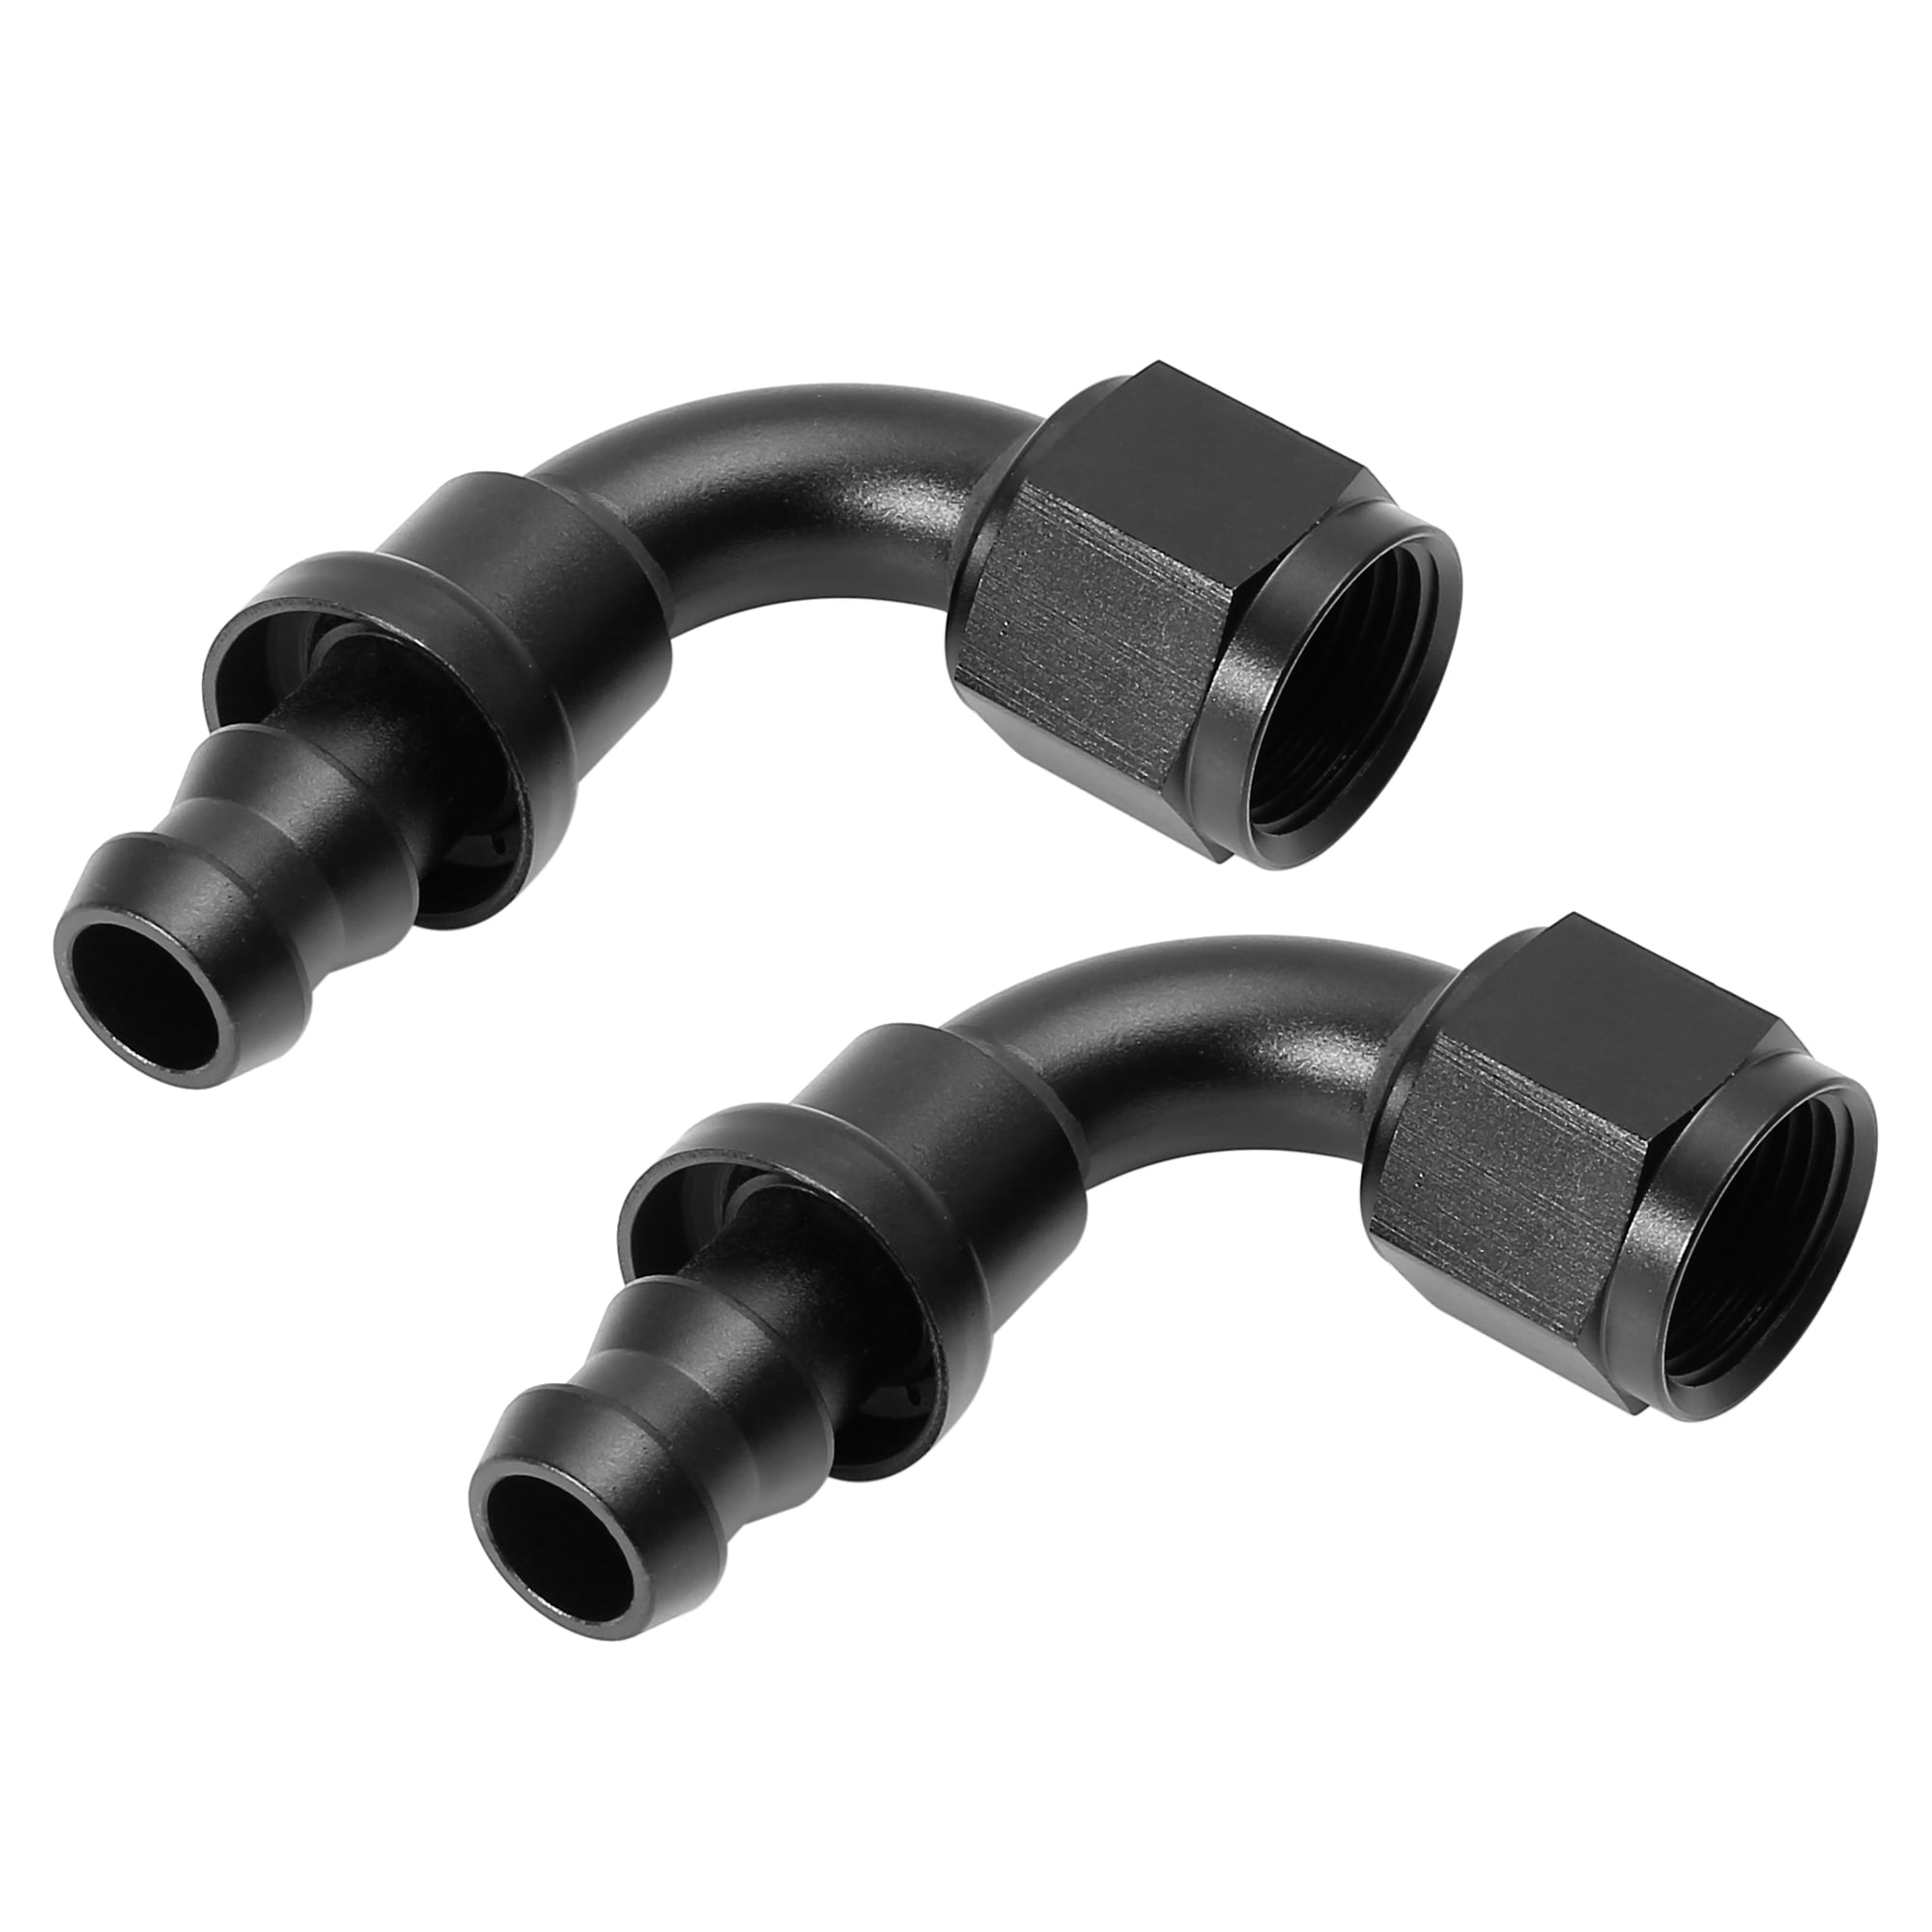 10 AN 10 AN 180 Degree Push-Lock Hose End Fittings Adapter